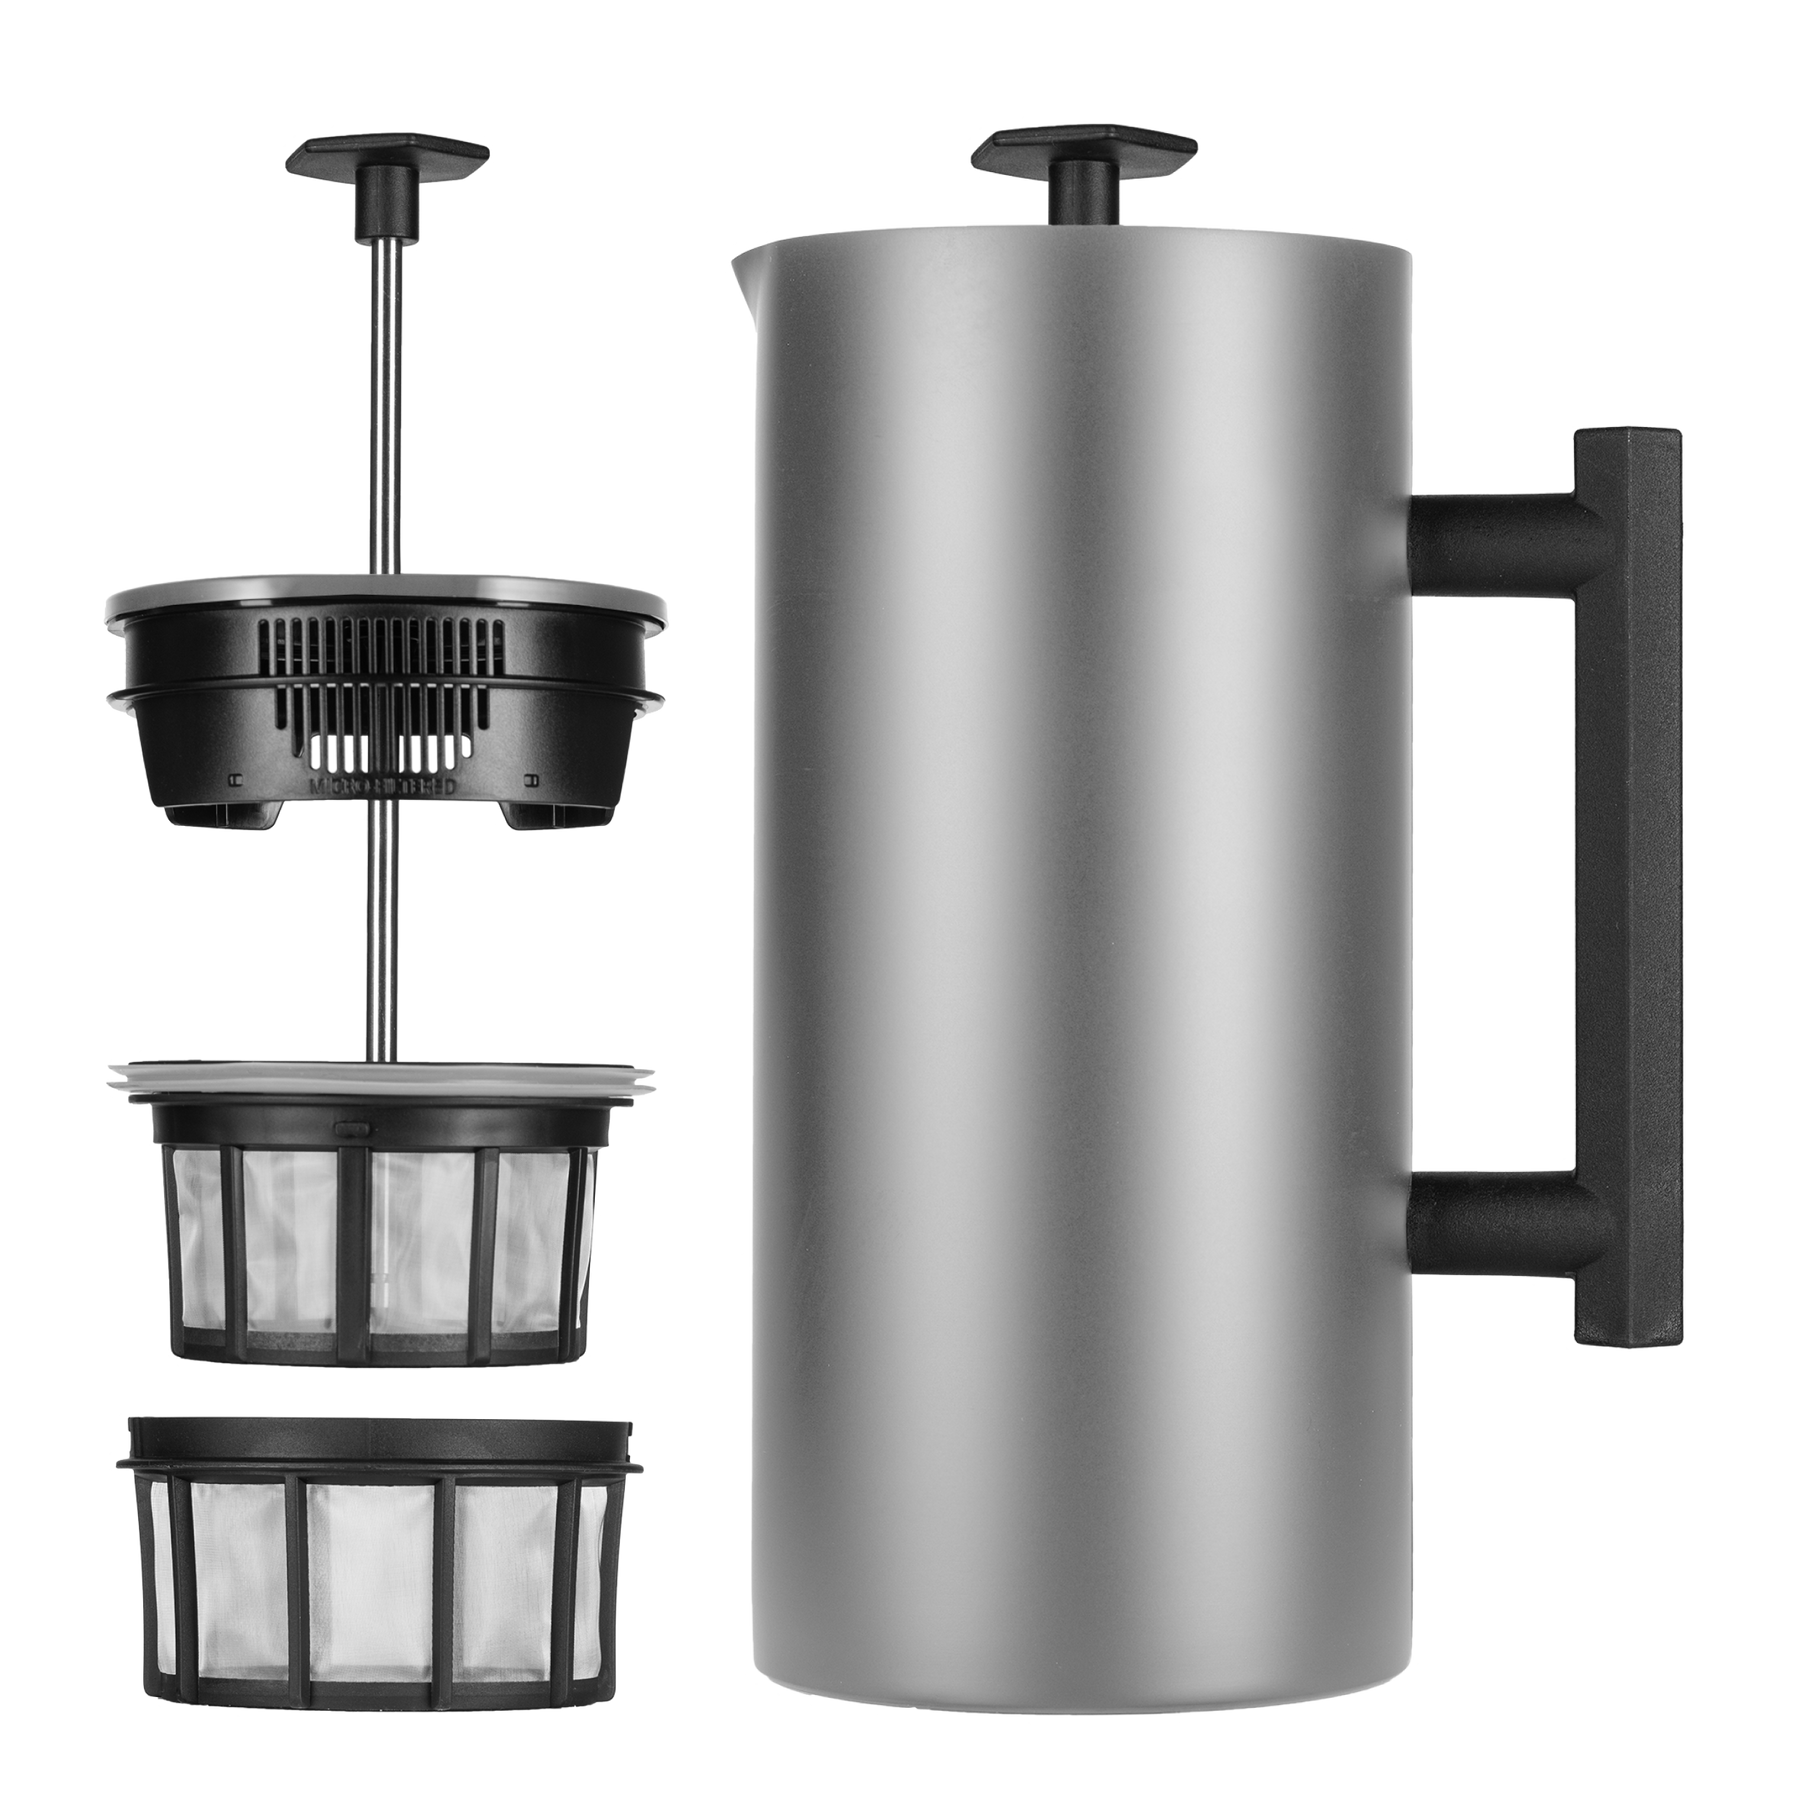 Value-Optimized Espro Stainless Steel French Press 950 ml